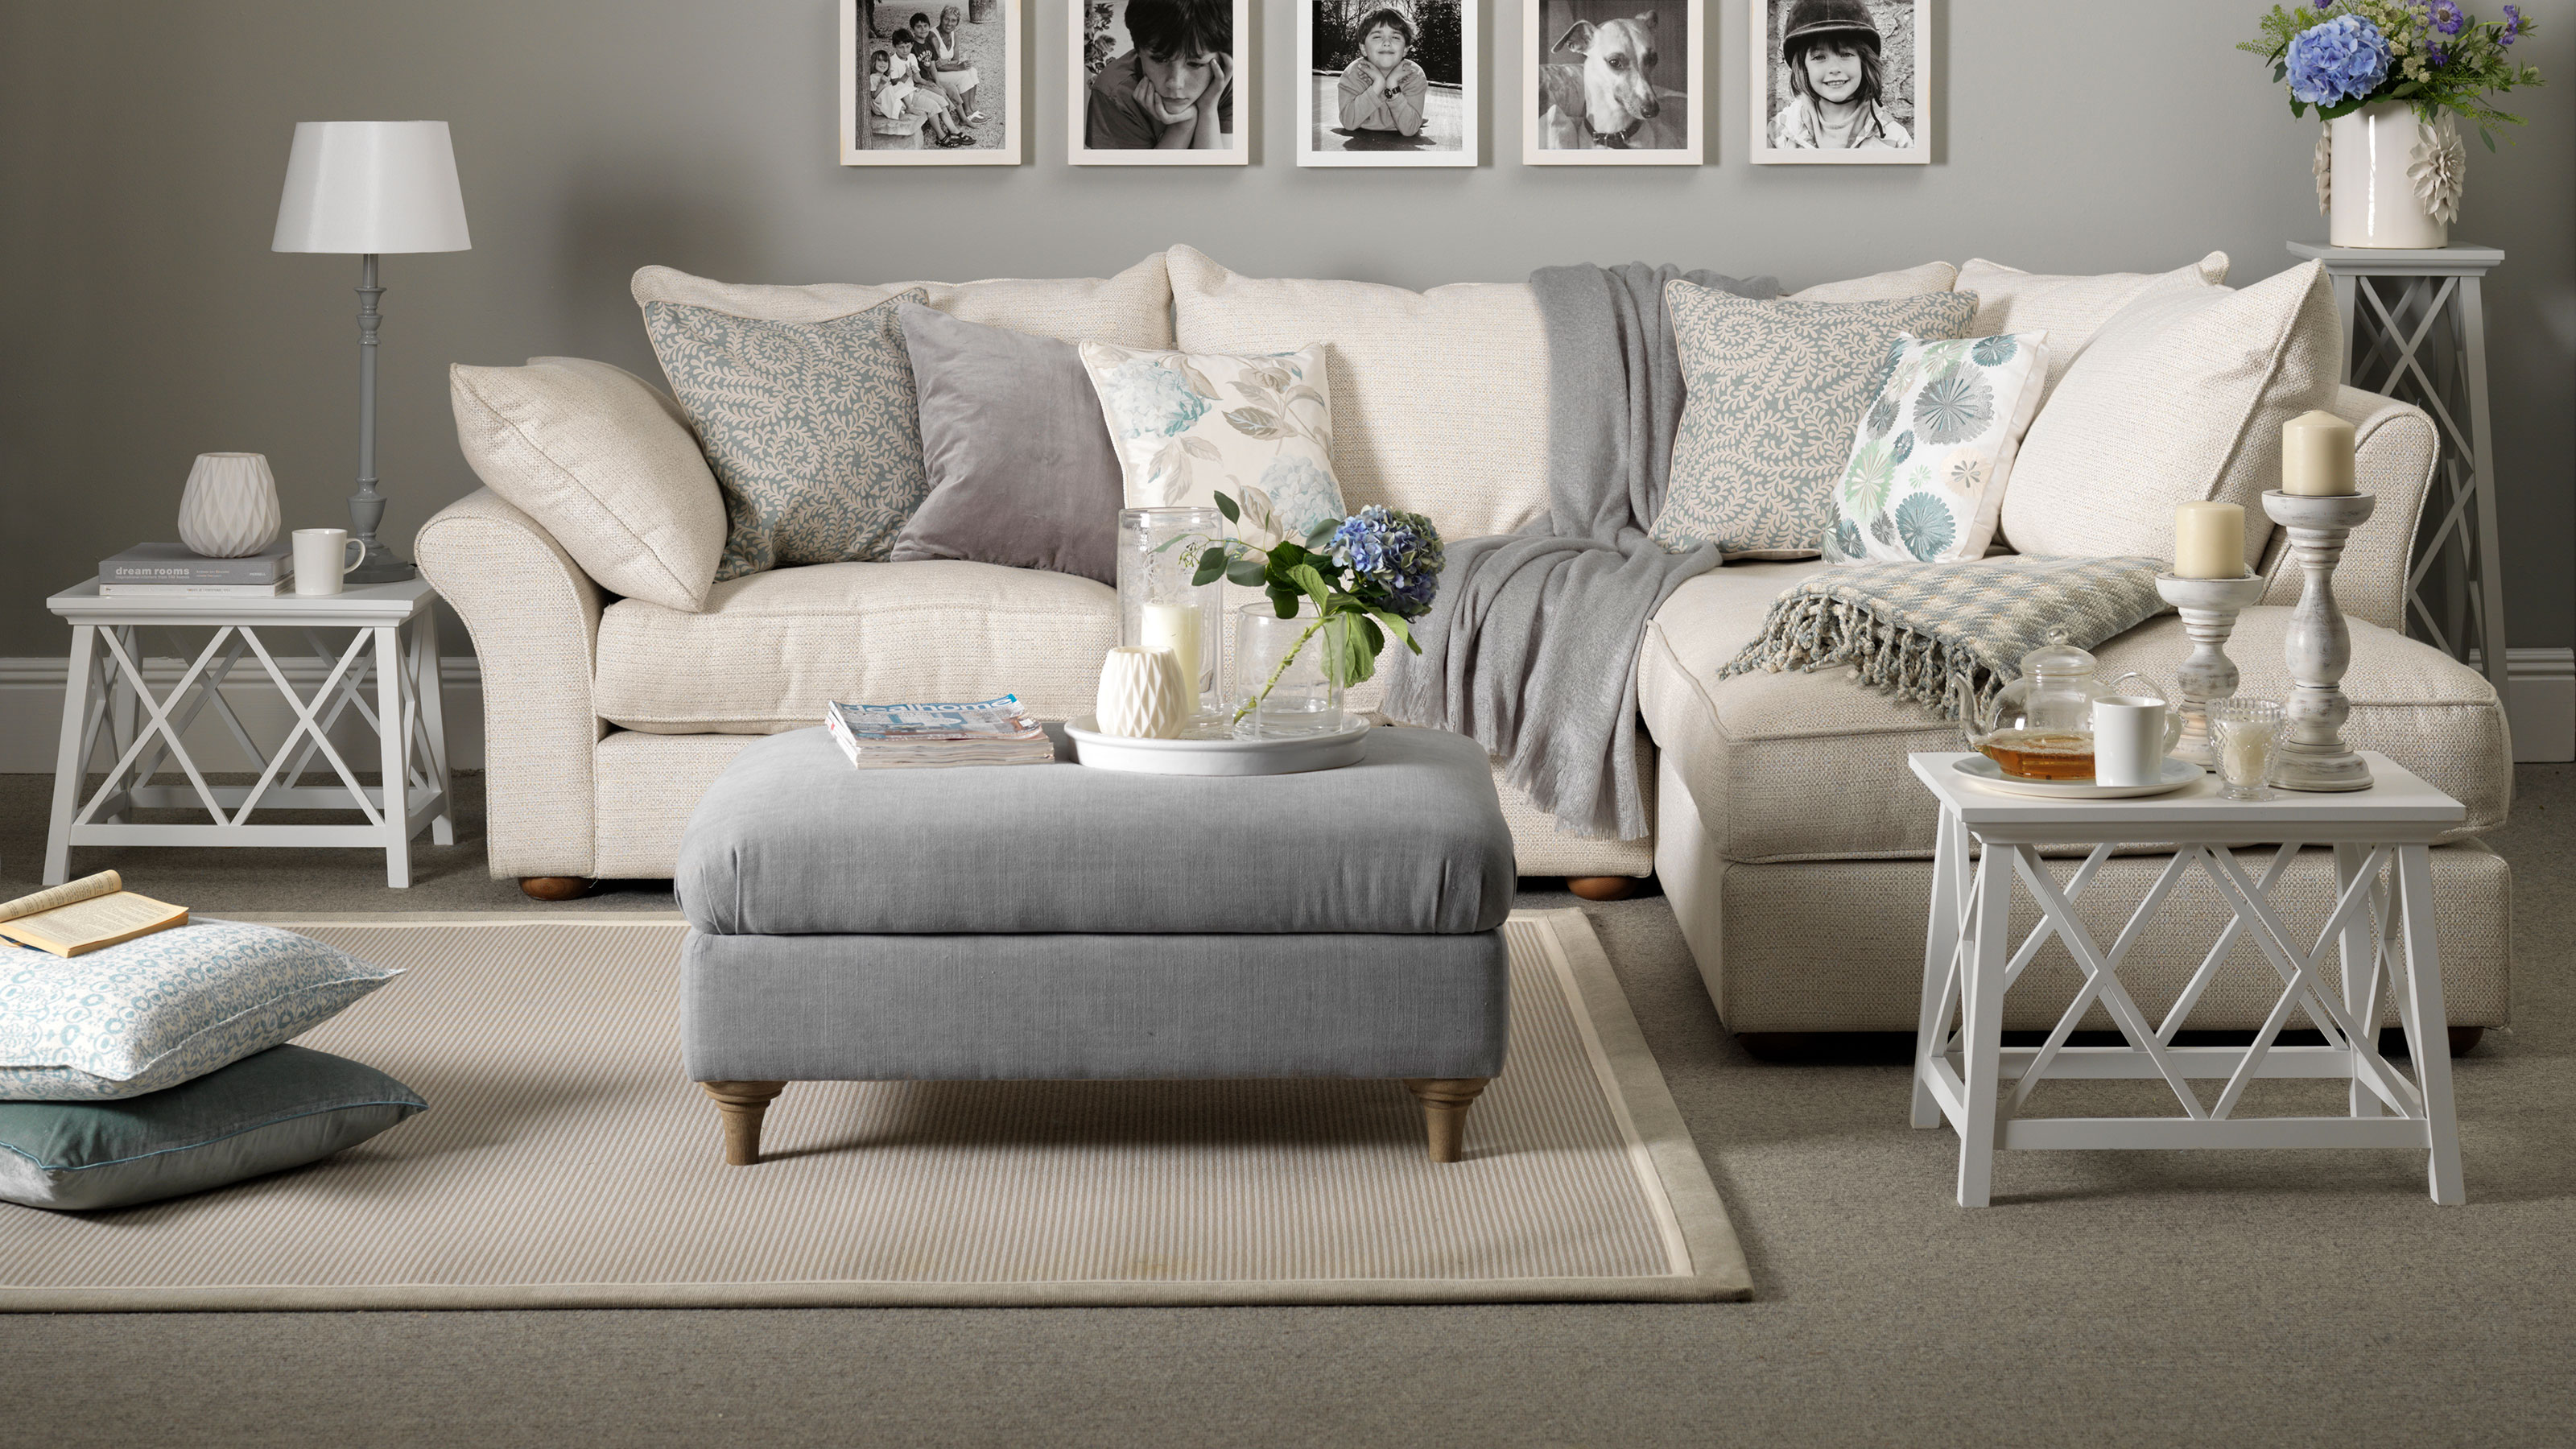 Grey Carpet Living Room Ideas – 10 Ways To Start Your Scheme | Ideal Home